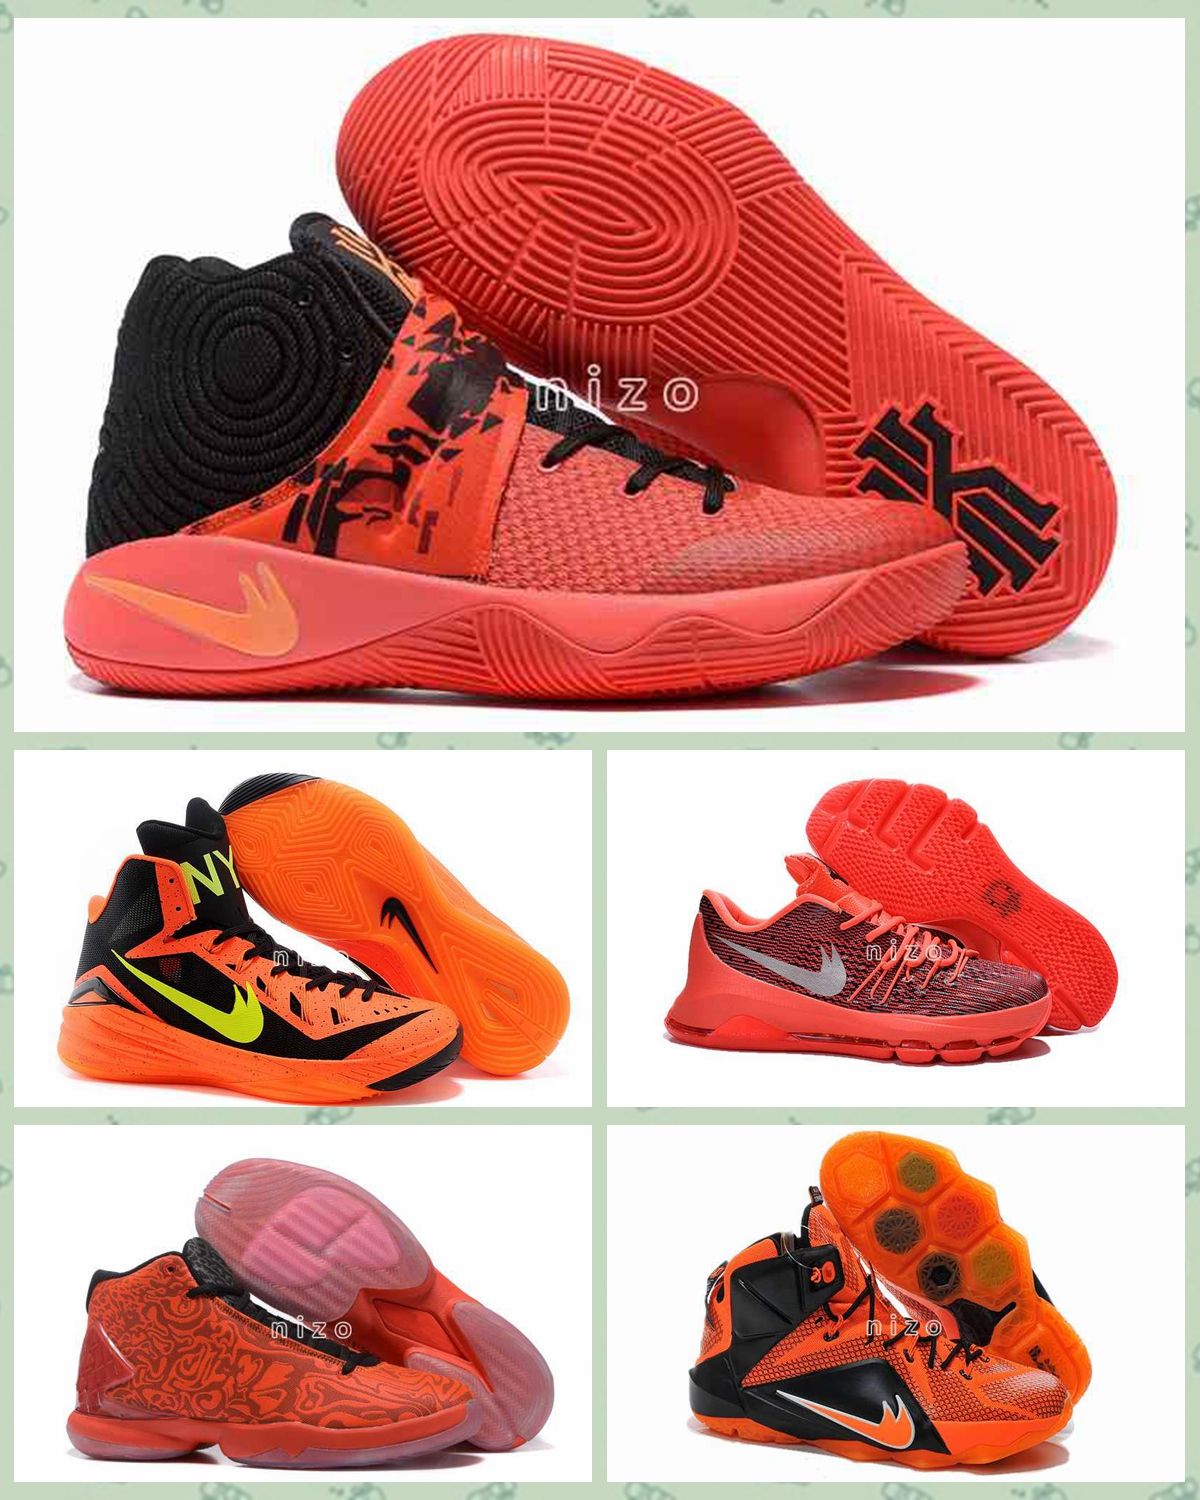 2016 Orange Shoes Mens Basketball Shoes Kobe Shoes Hyperdunk Kyrie Irving  Shoes Kd 8 Retro 12 Basketball Shoes Size 41 46 Cp3 Shoes Kids Sneakers  From Nizo, ...